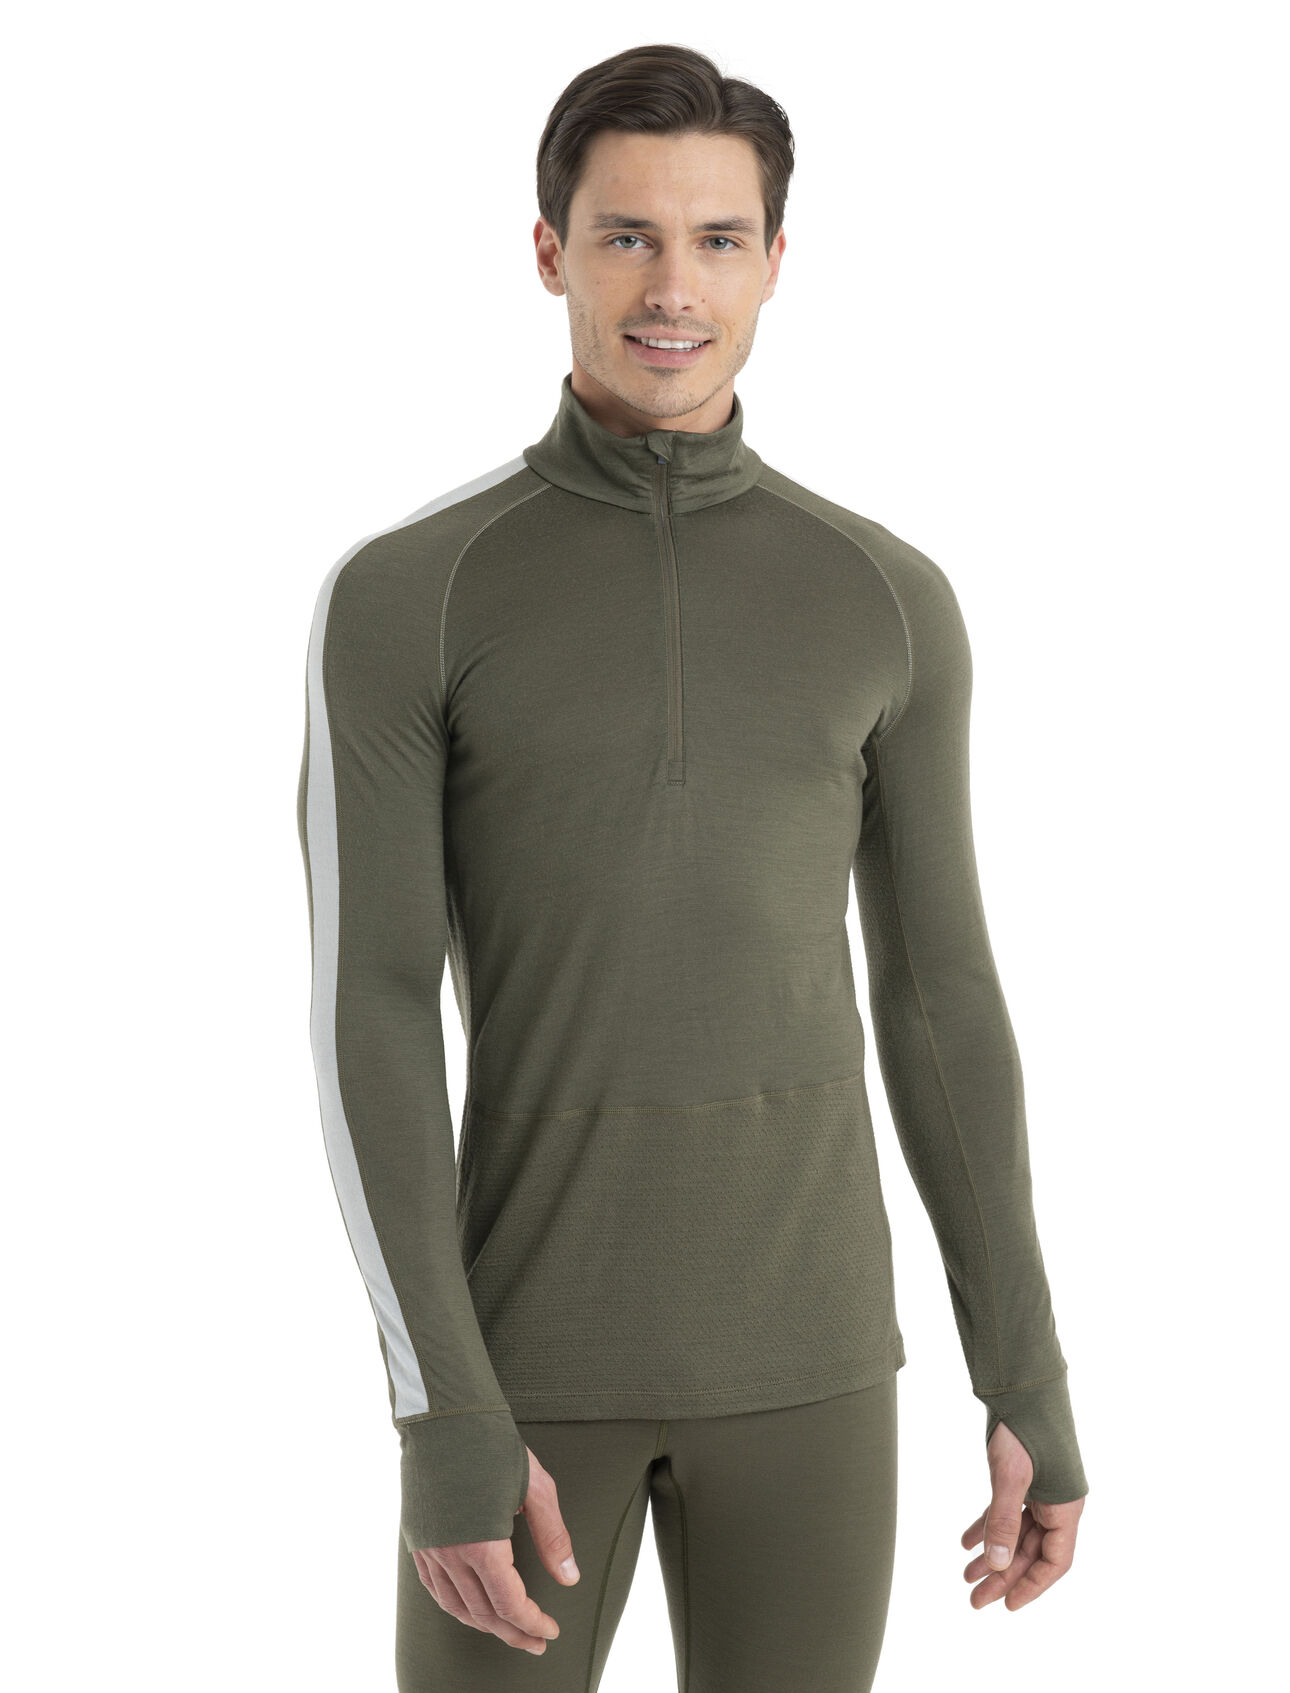 Mens 200 ZoneKnit™ Merino Long Sleeve Half Zip Thermal Top A midweight merino base layer top designed to help regulate temperature during high-intensity activity, the 200 ZoneKnit™ Long Sleeve Half Zip features 100% pure and natural merino wool.